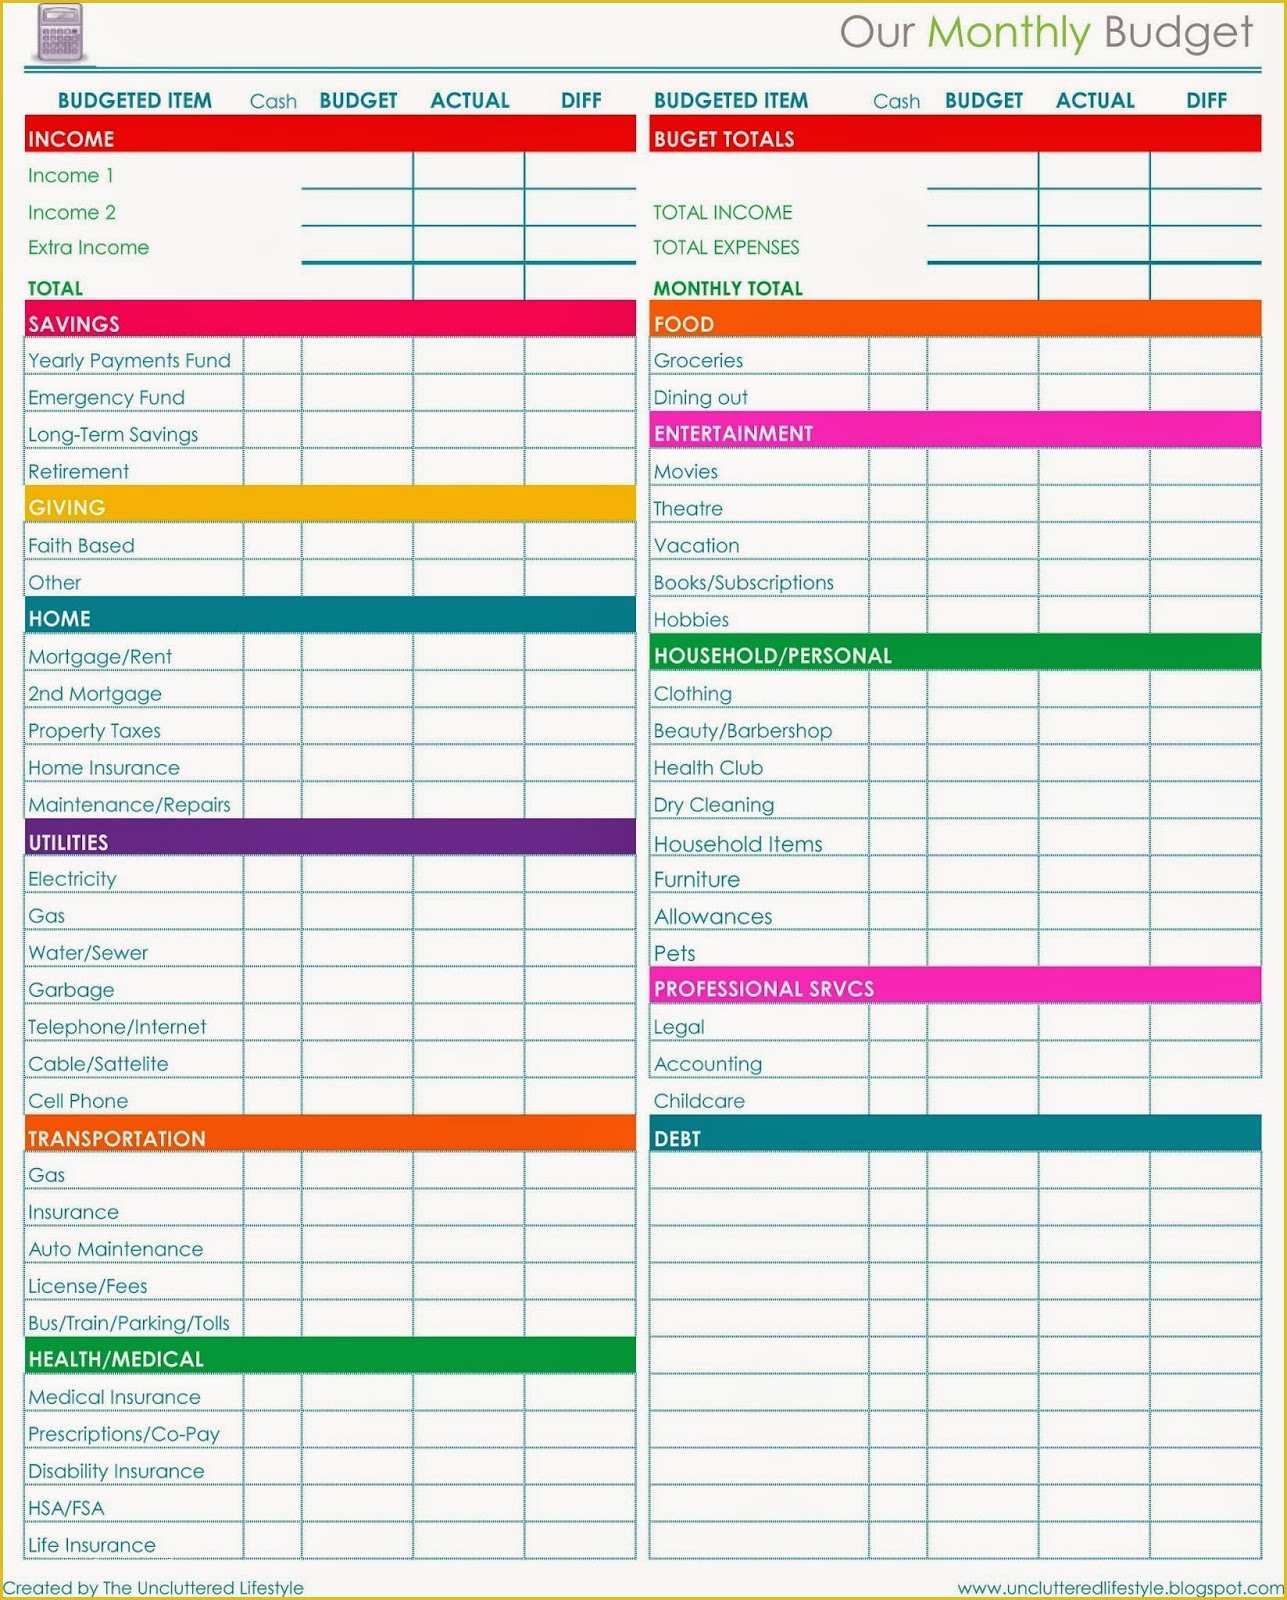 Free Personal Budget Template Of 2015 Planner More Free Printables Find Lifestyle